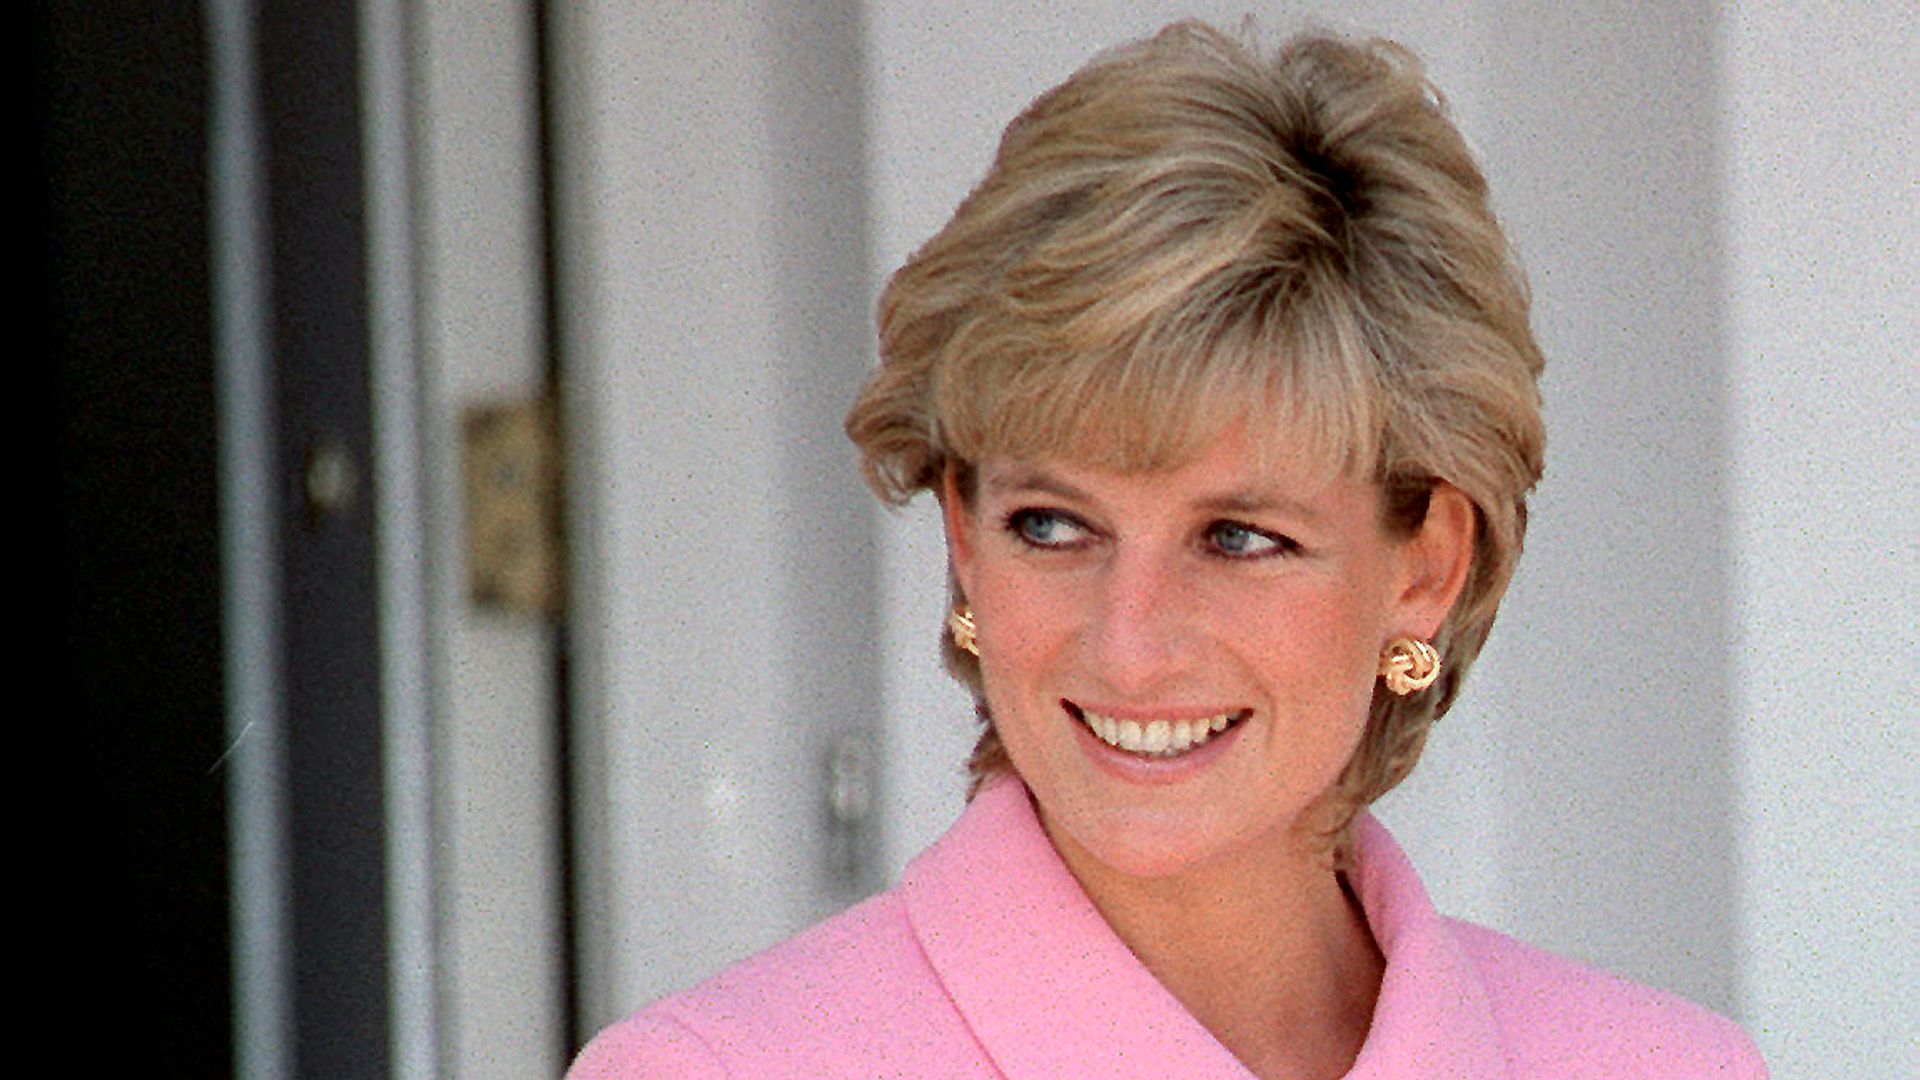 Charles Spencer shares rare family picture - and resemblance to sister Princess Diana is 'remarkable'